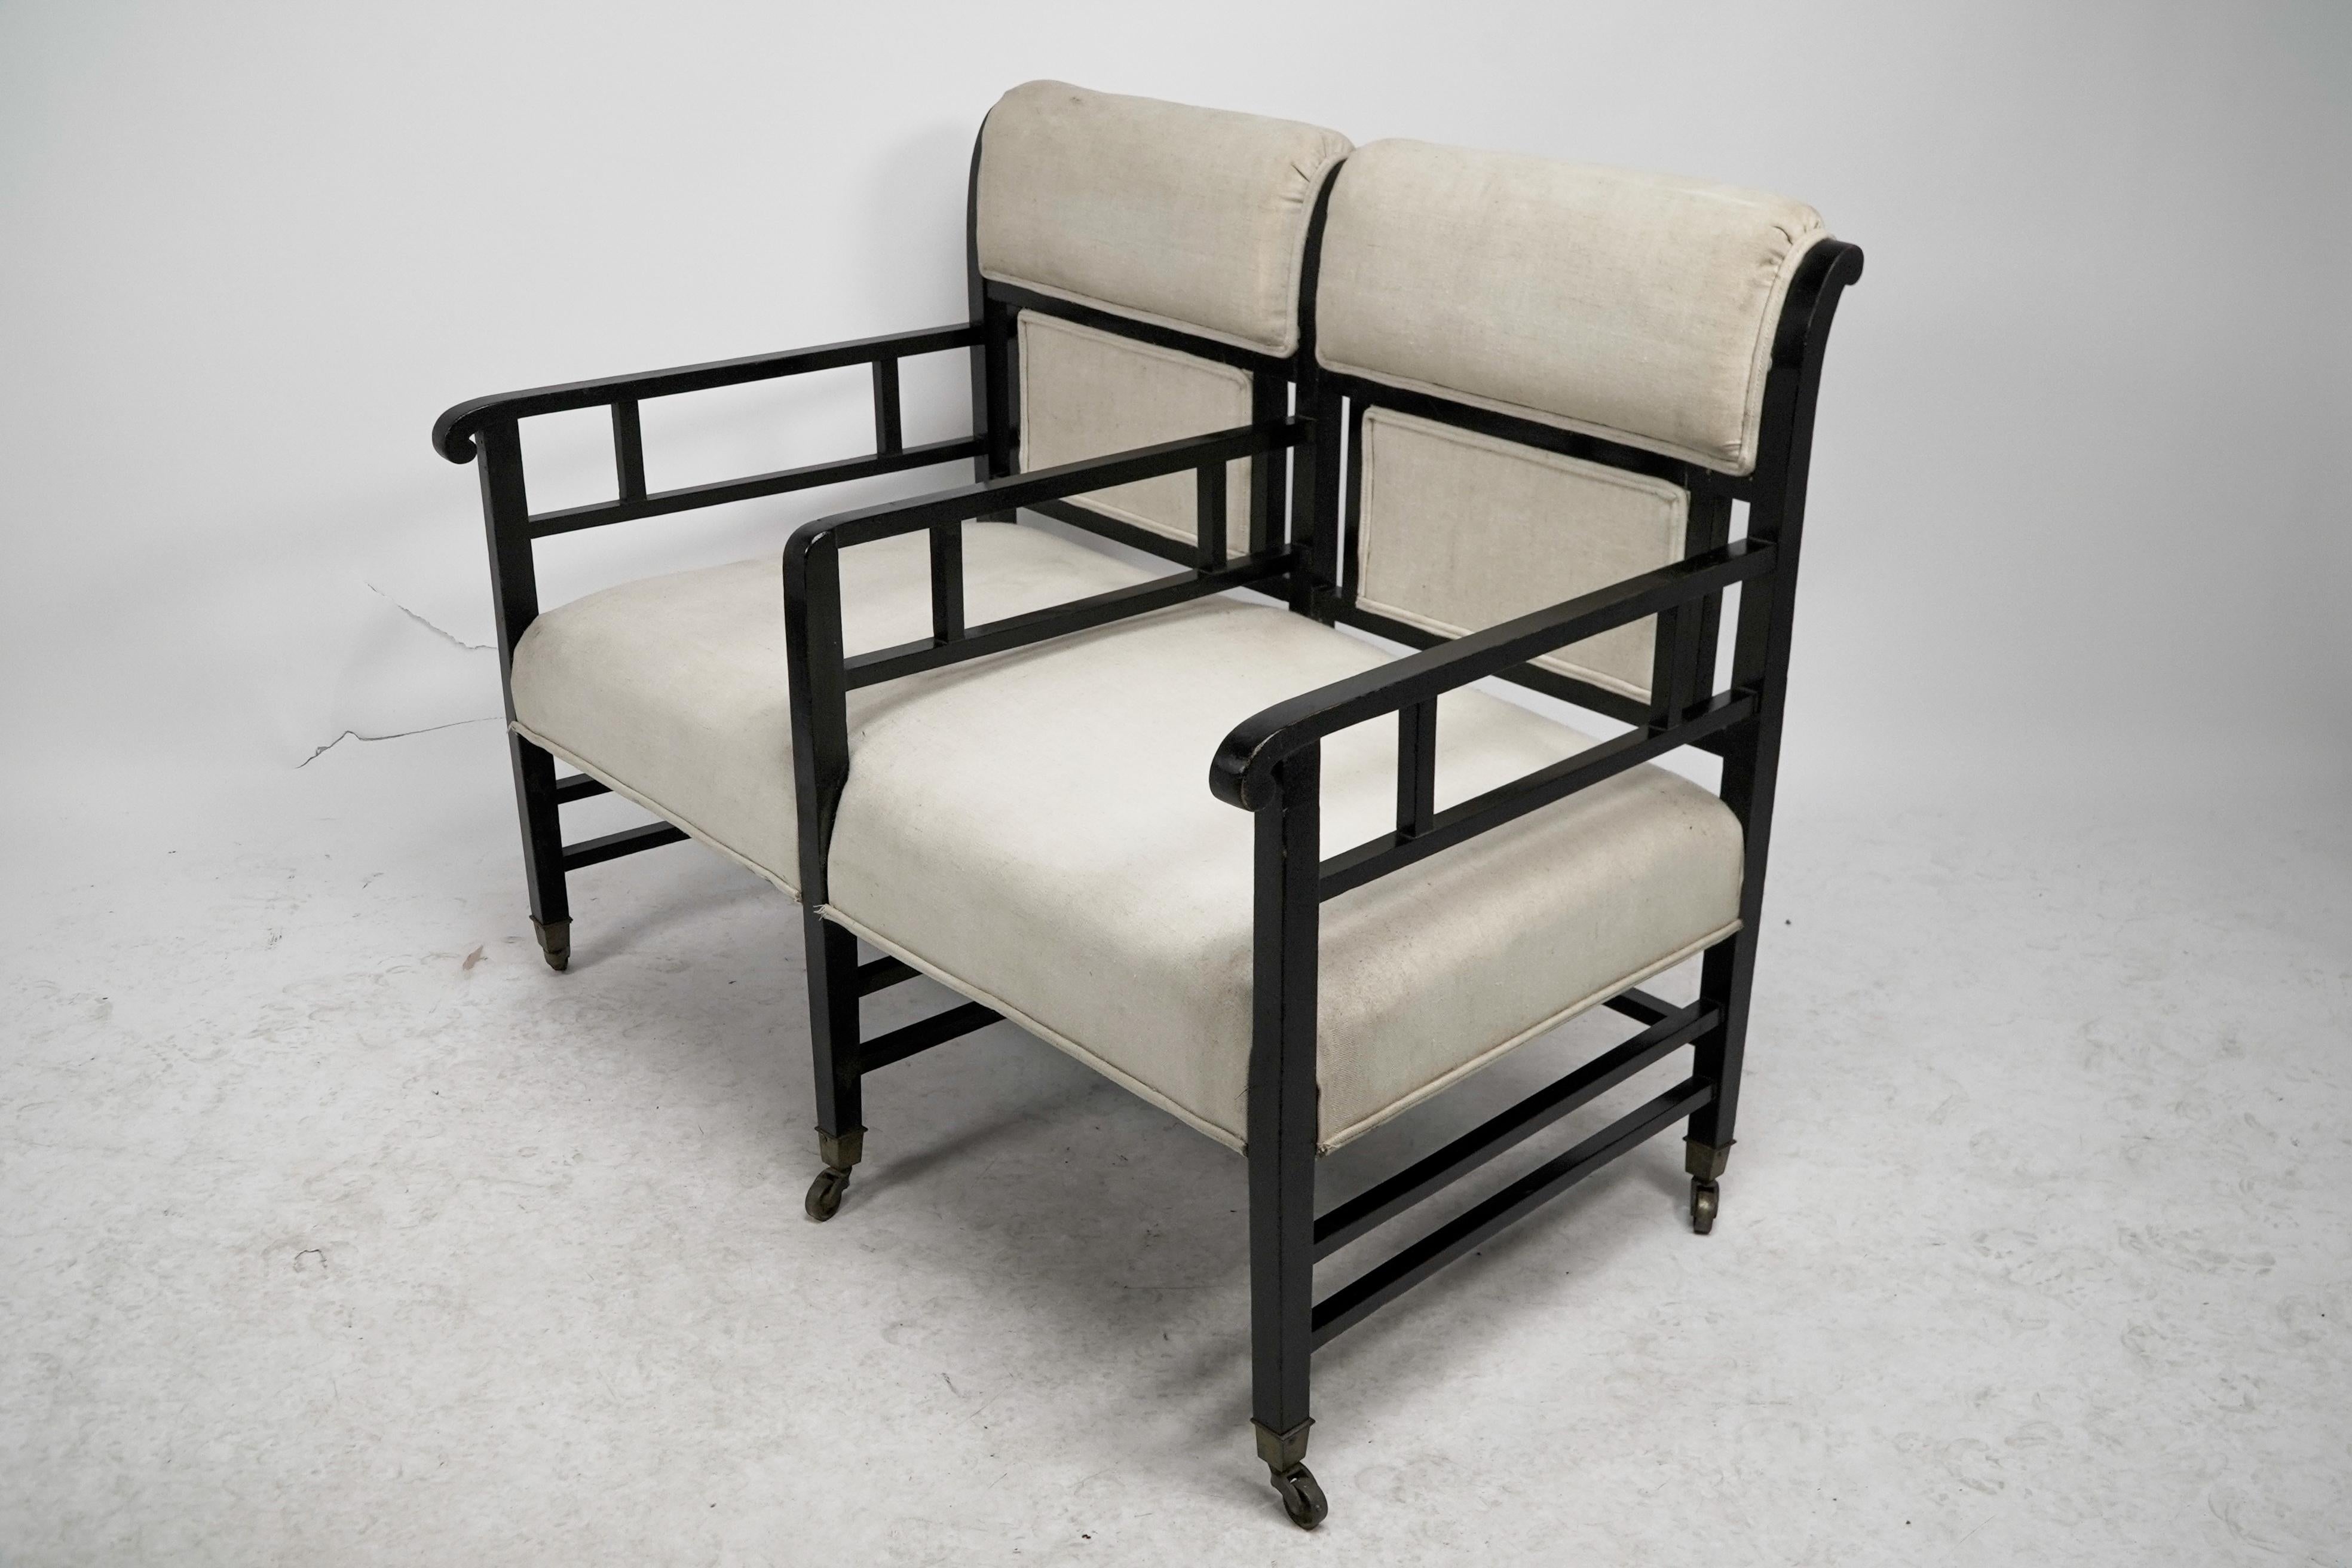 Ebonized E W Godwin (attributed). An Anglo-Japanese ebonized duet or conversation settee. For Sale